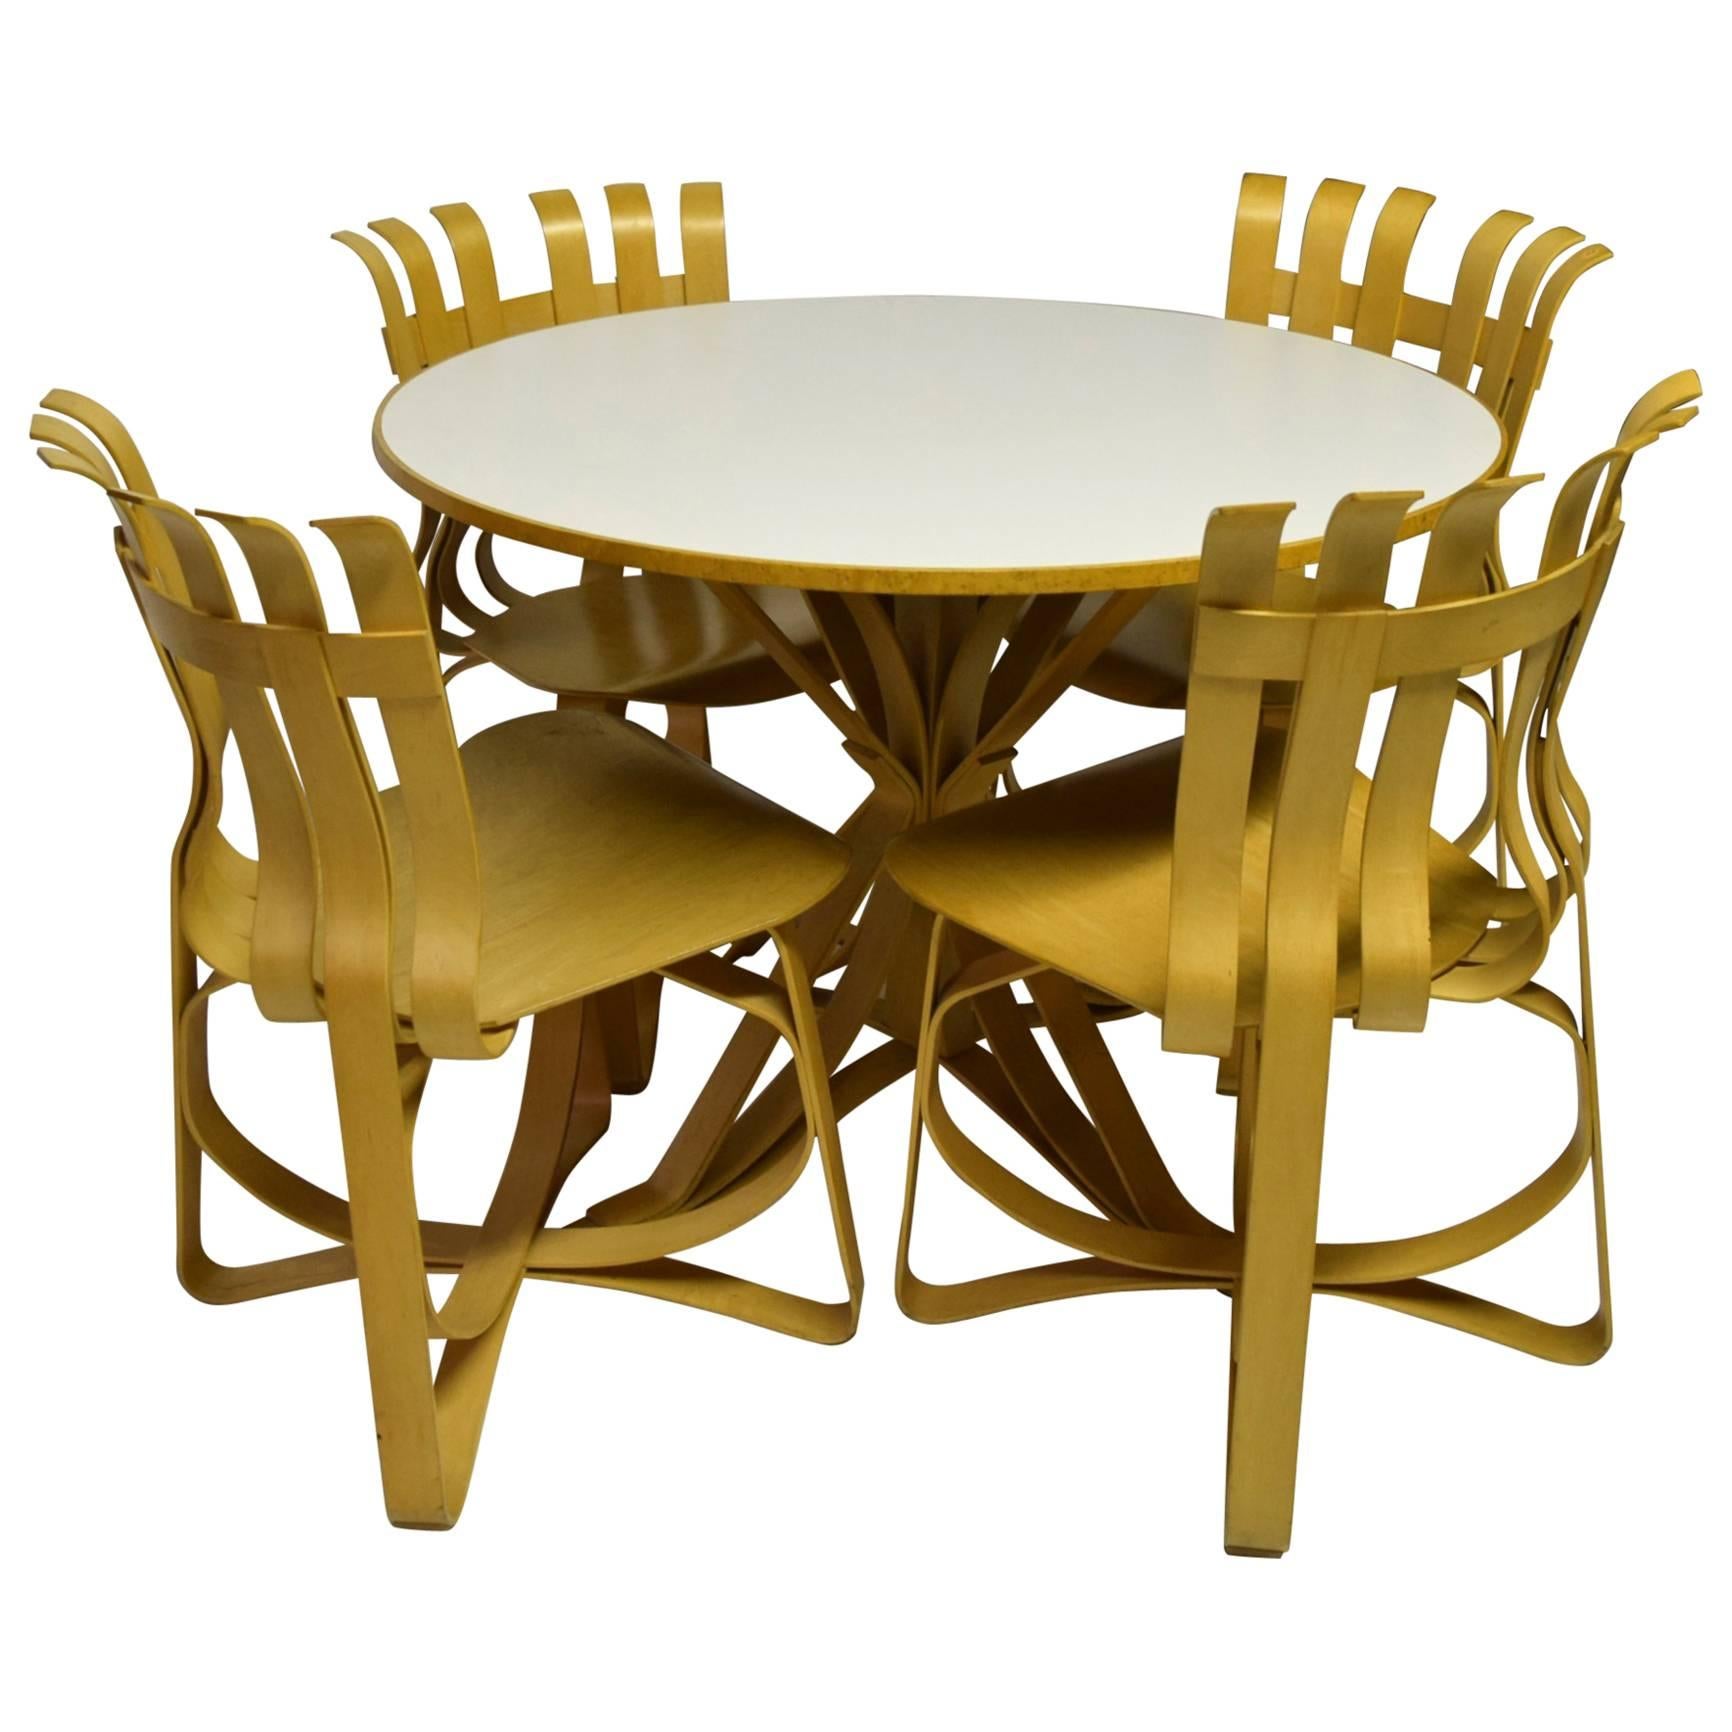 Dining Table and Four Chairs Designed by Frank Gehry for Knoll, 1997, USA